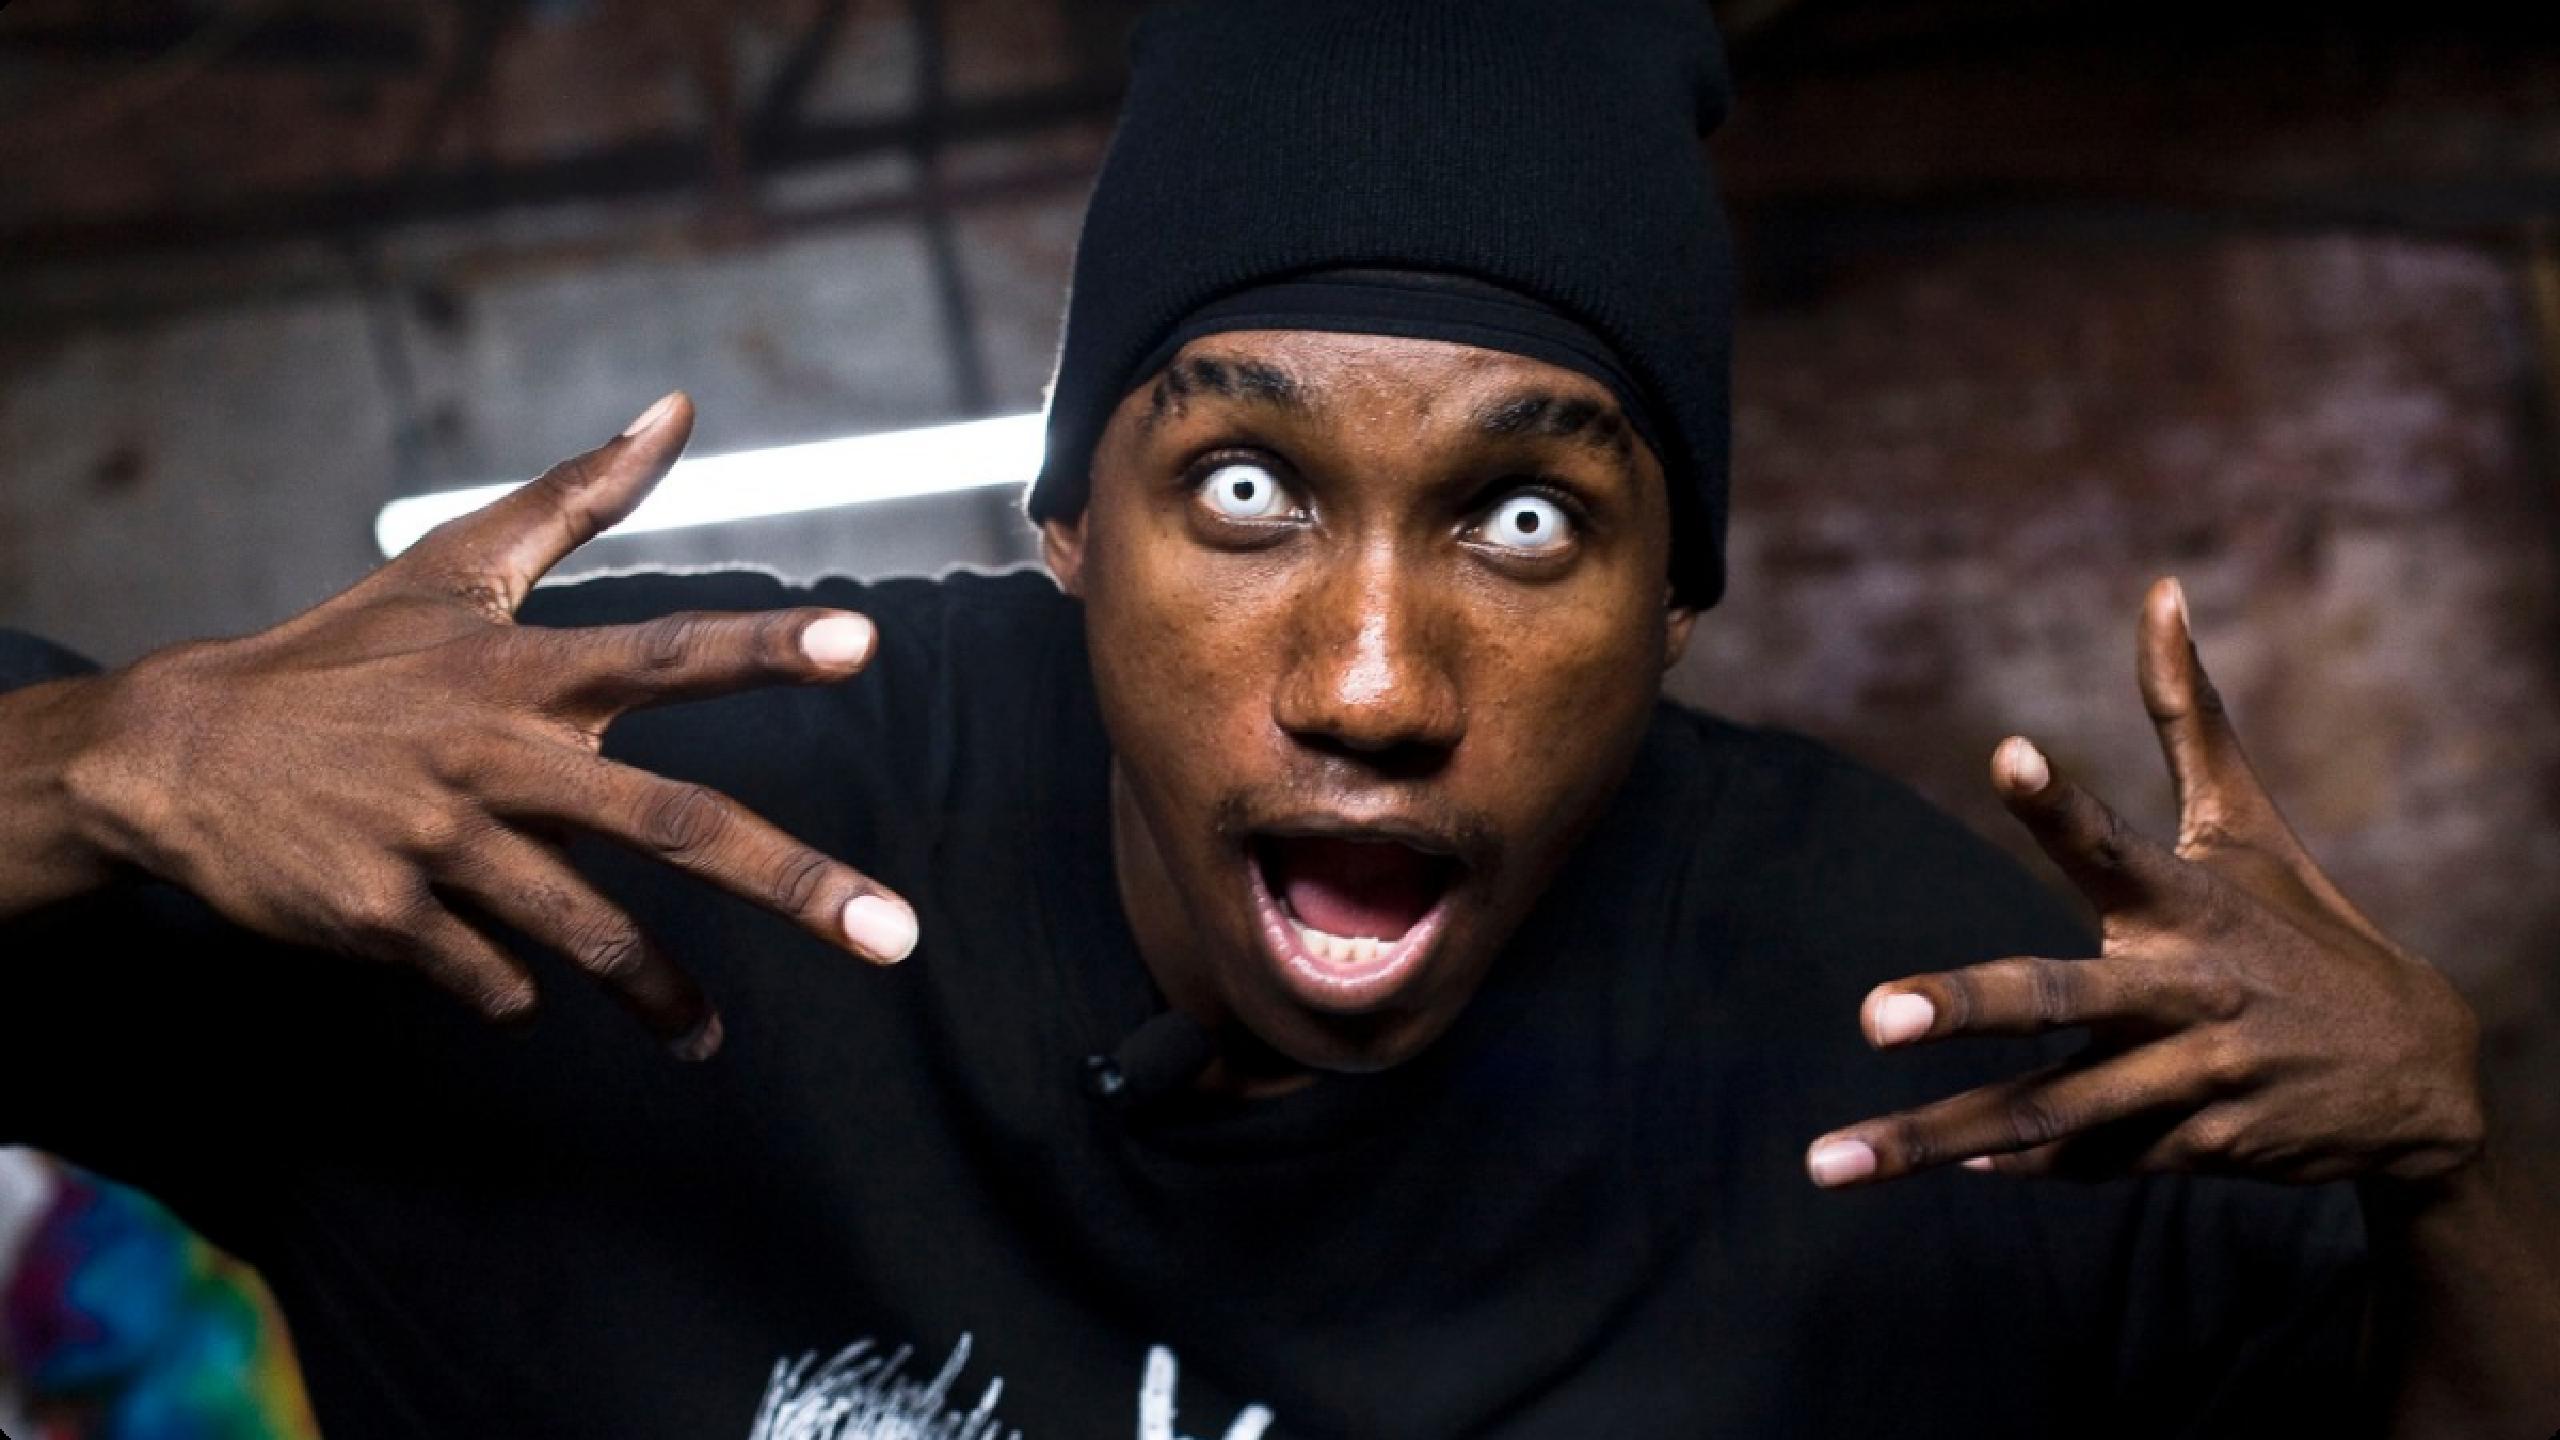 Hopsin Tickets Concerts and Tours 2023 2024 Wegow